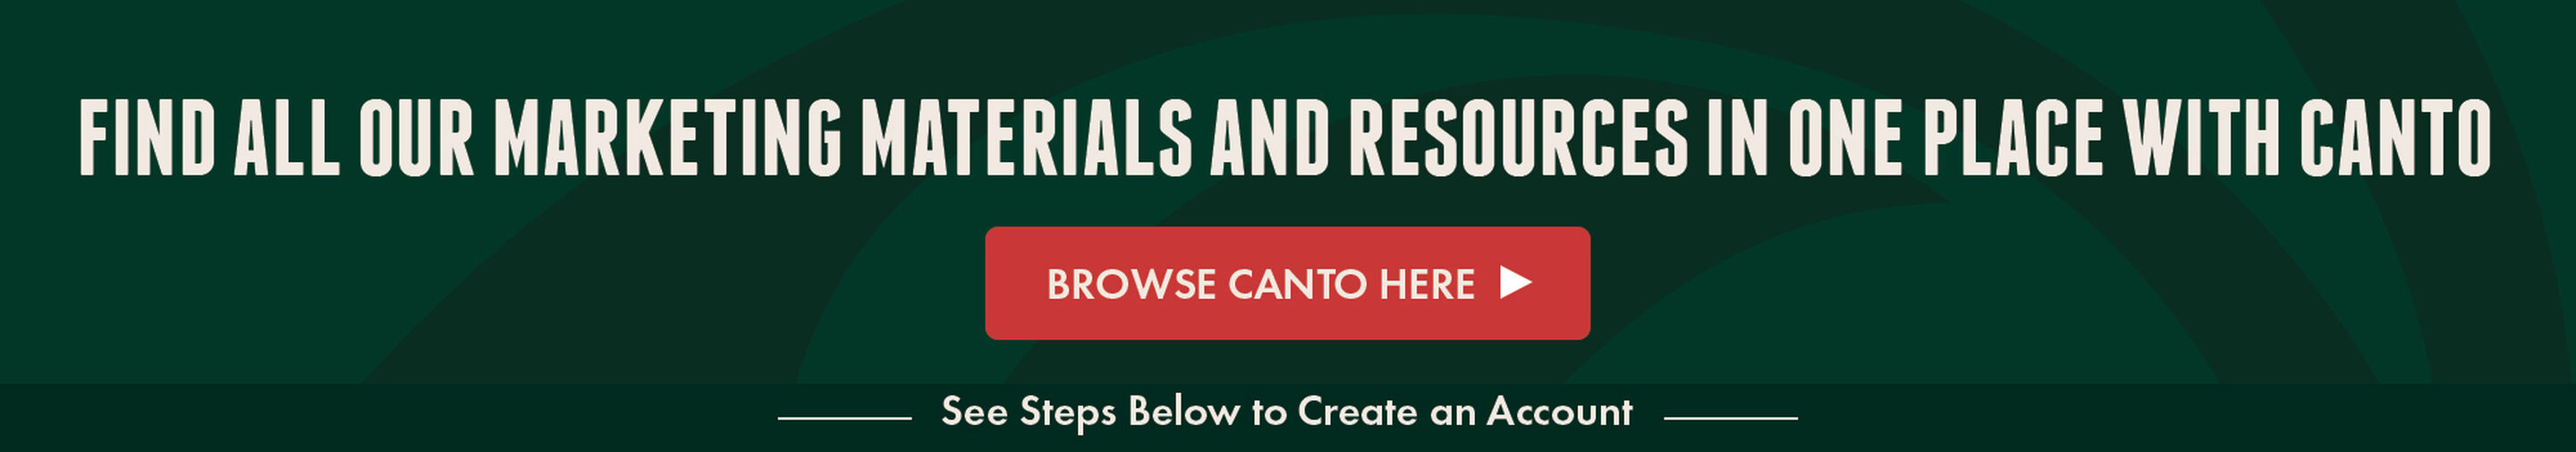 Find All Our Marketing Materials And Resources In One Place With Canto - Browse Canto Here - See Steps Below To Create An Account